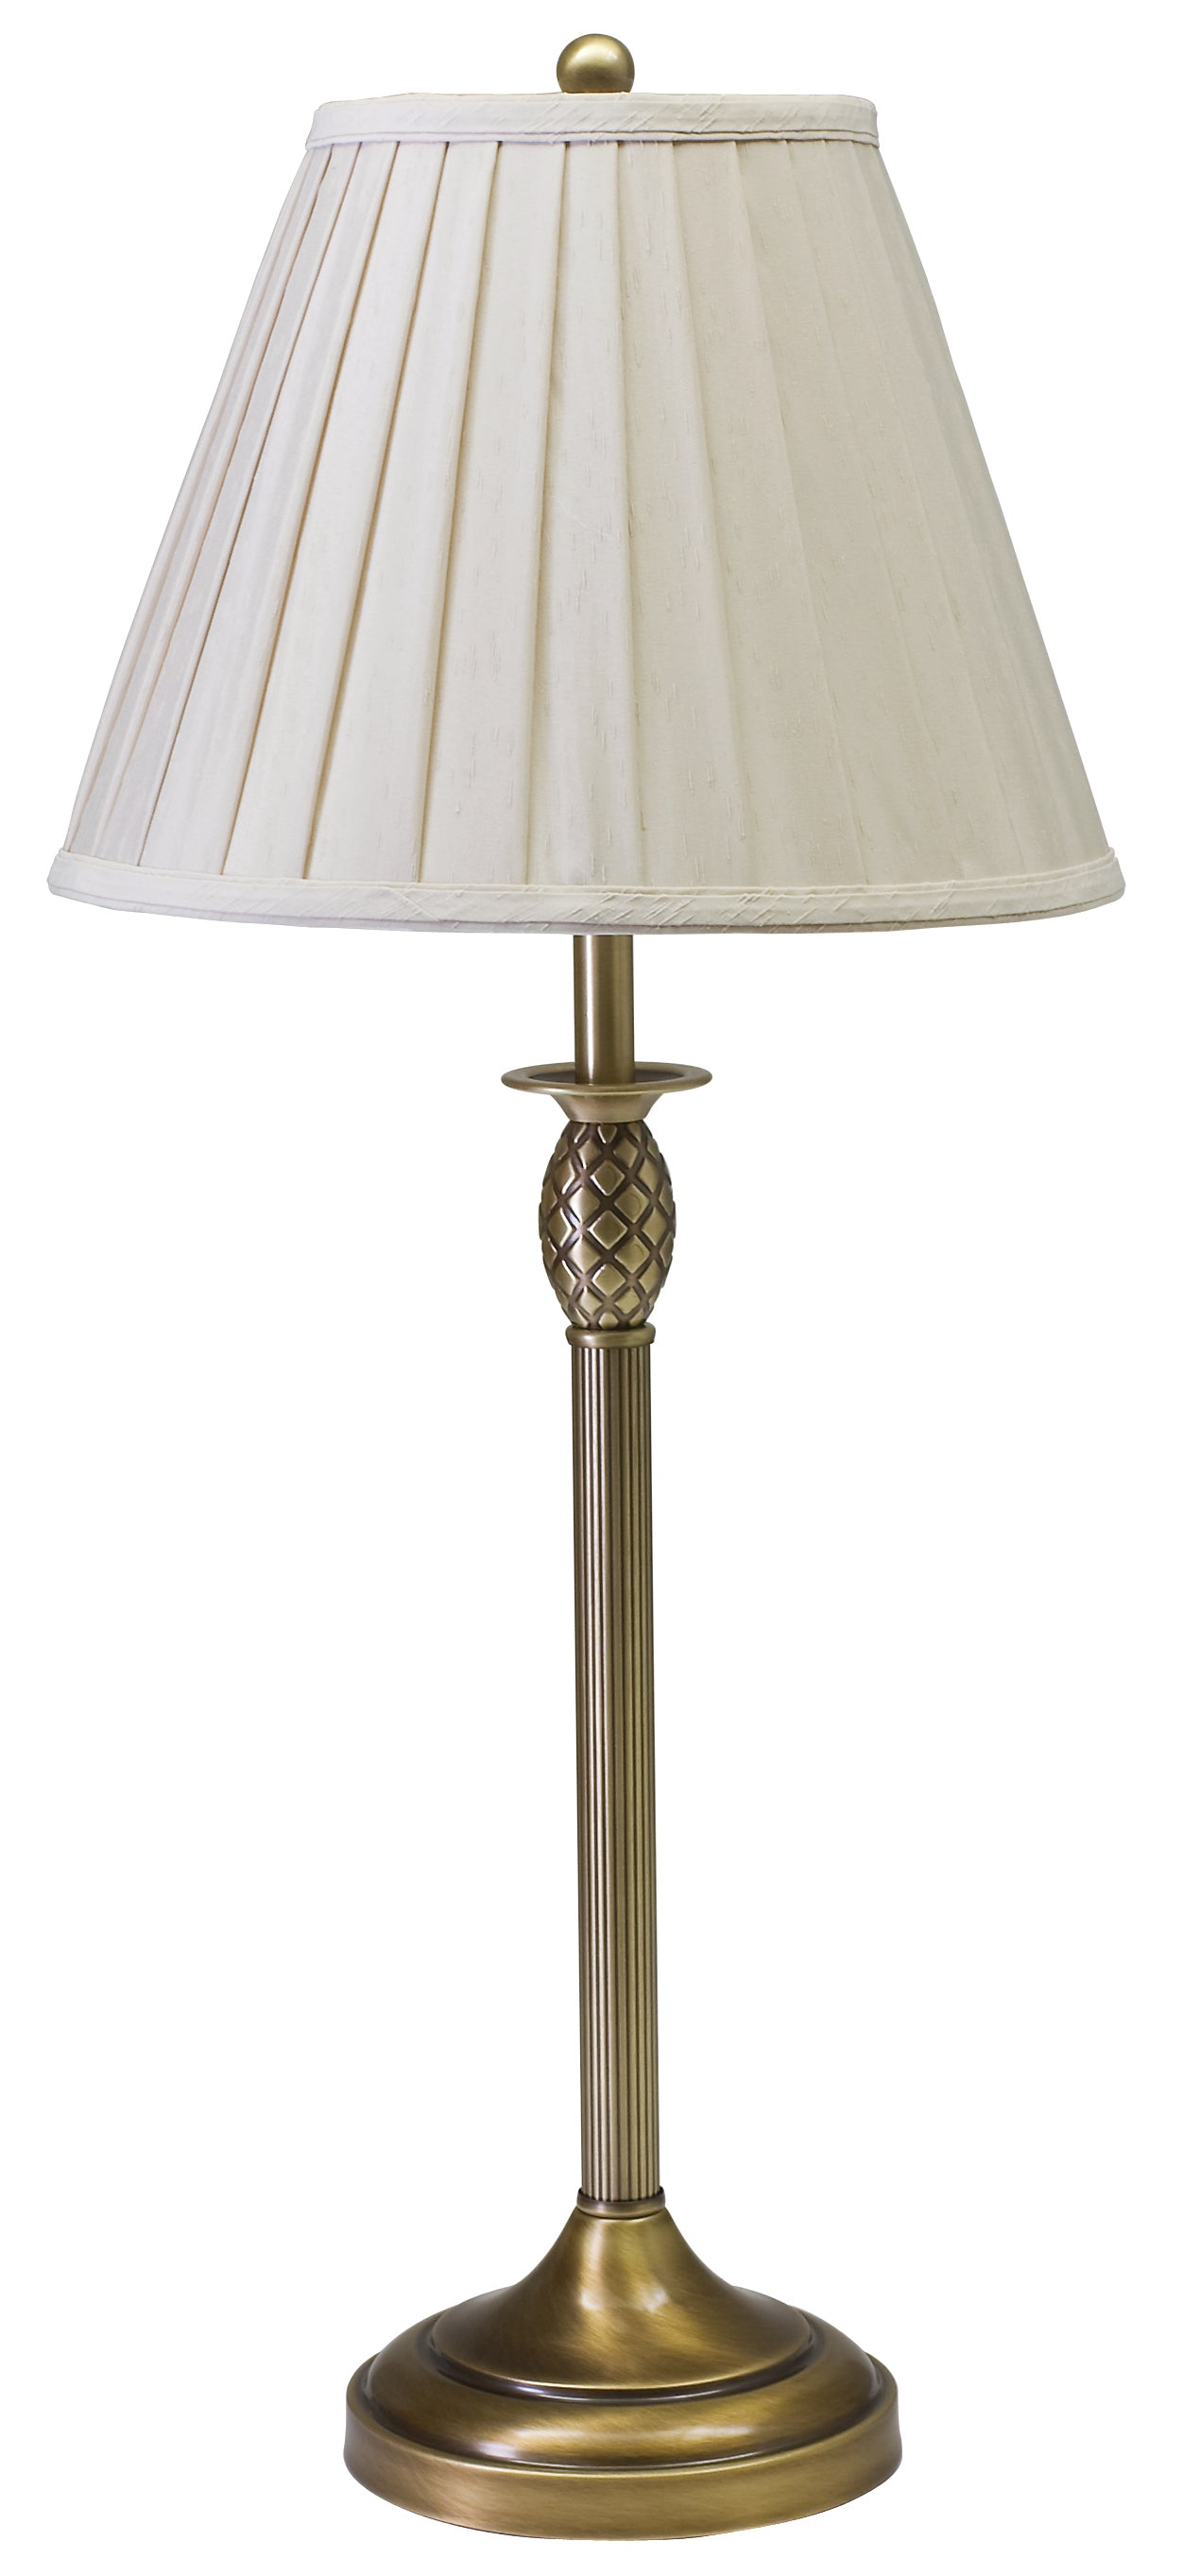 House of Troy Vergennes Antique Brass Table Lamp VG450-AB